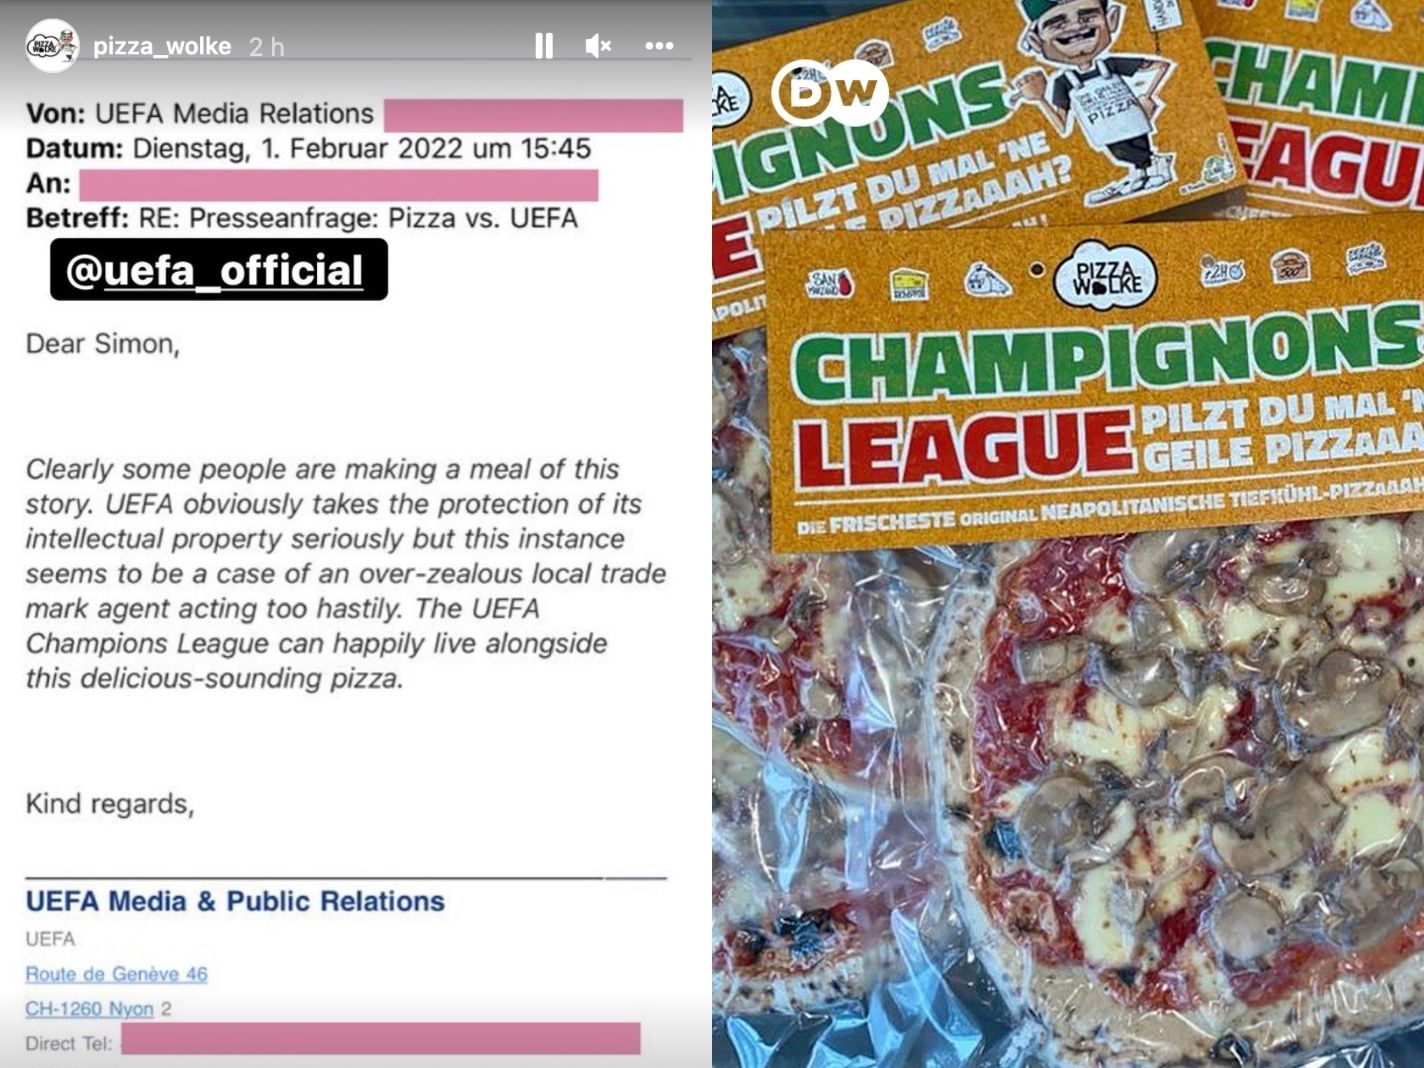 The mushroom topped pizza UEFA threatened to sue because of copyright breach